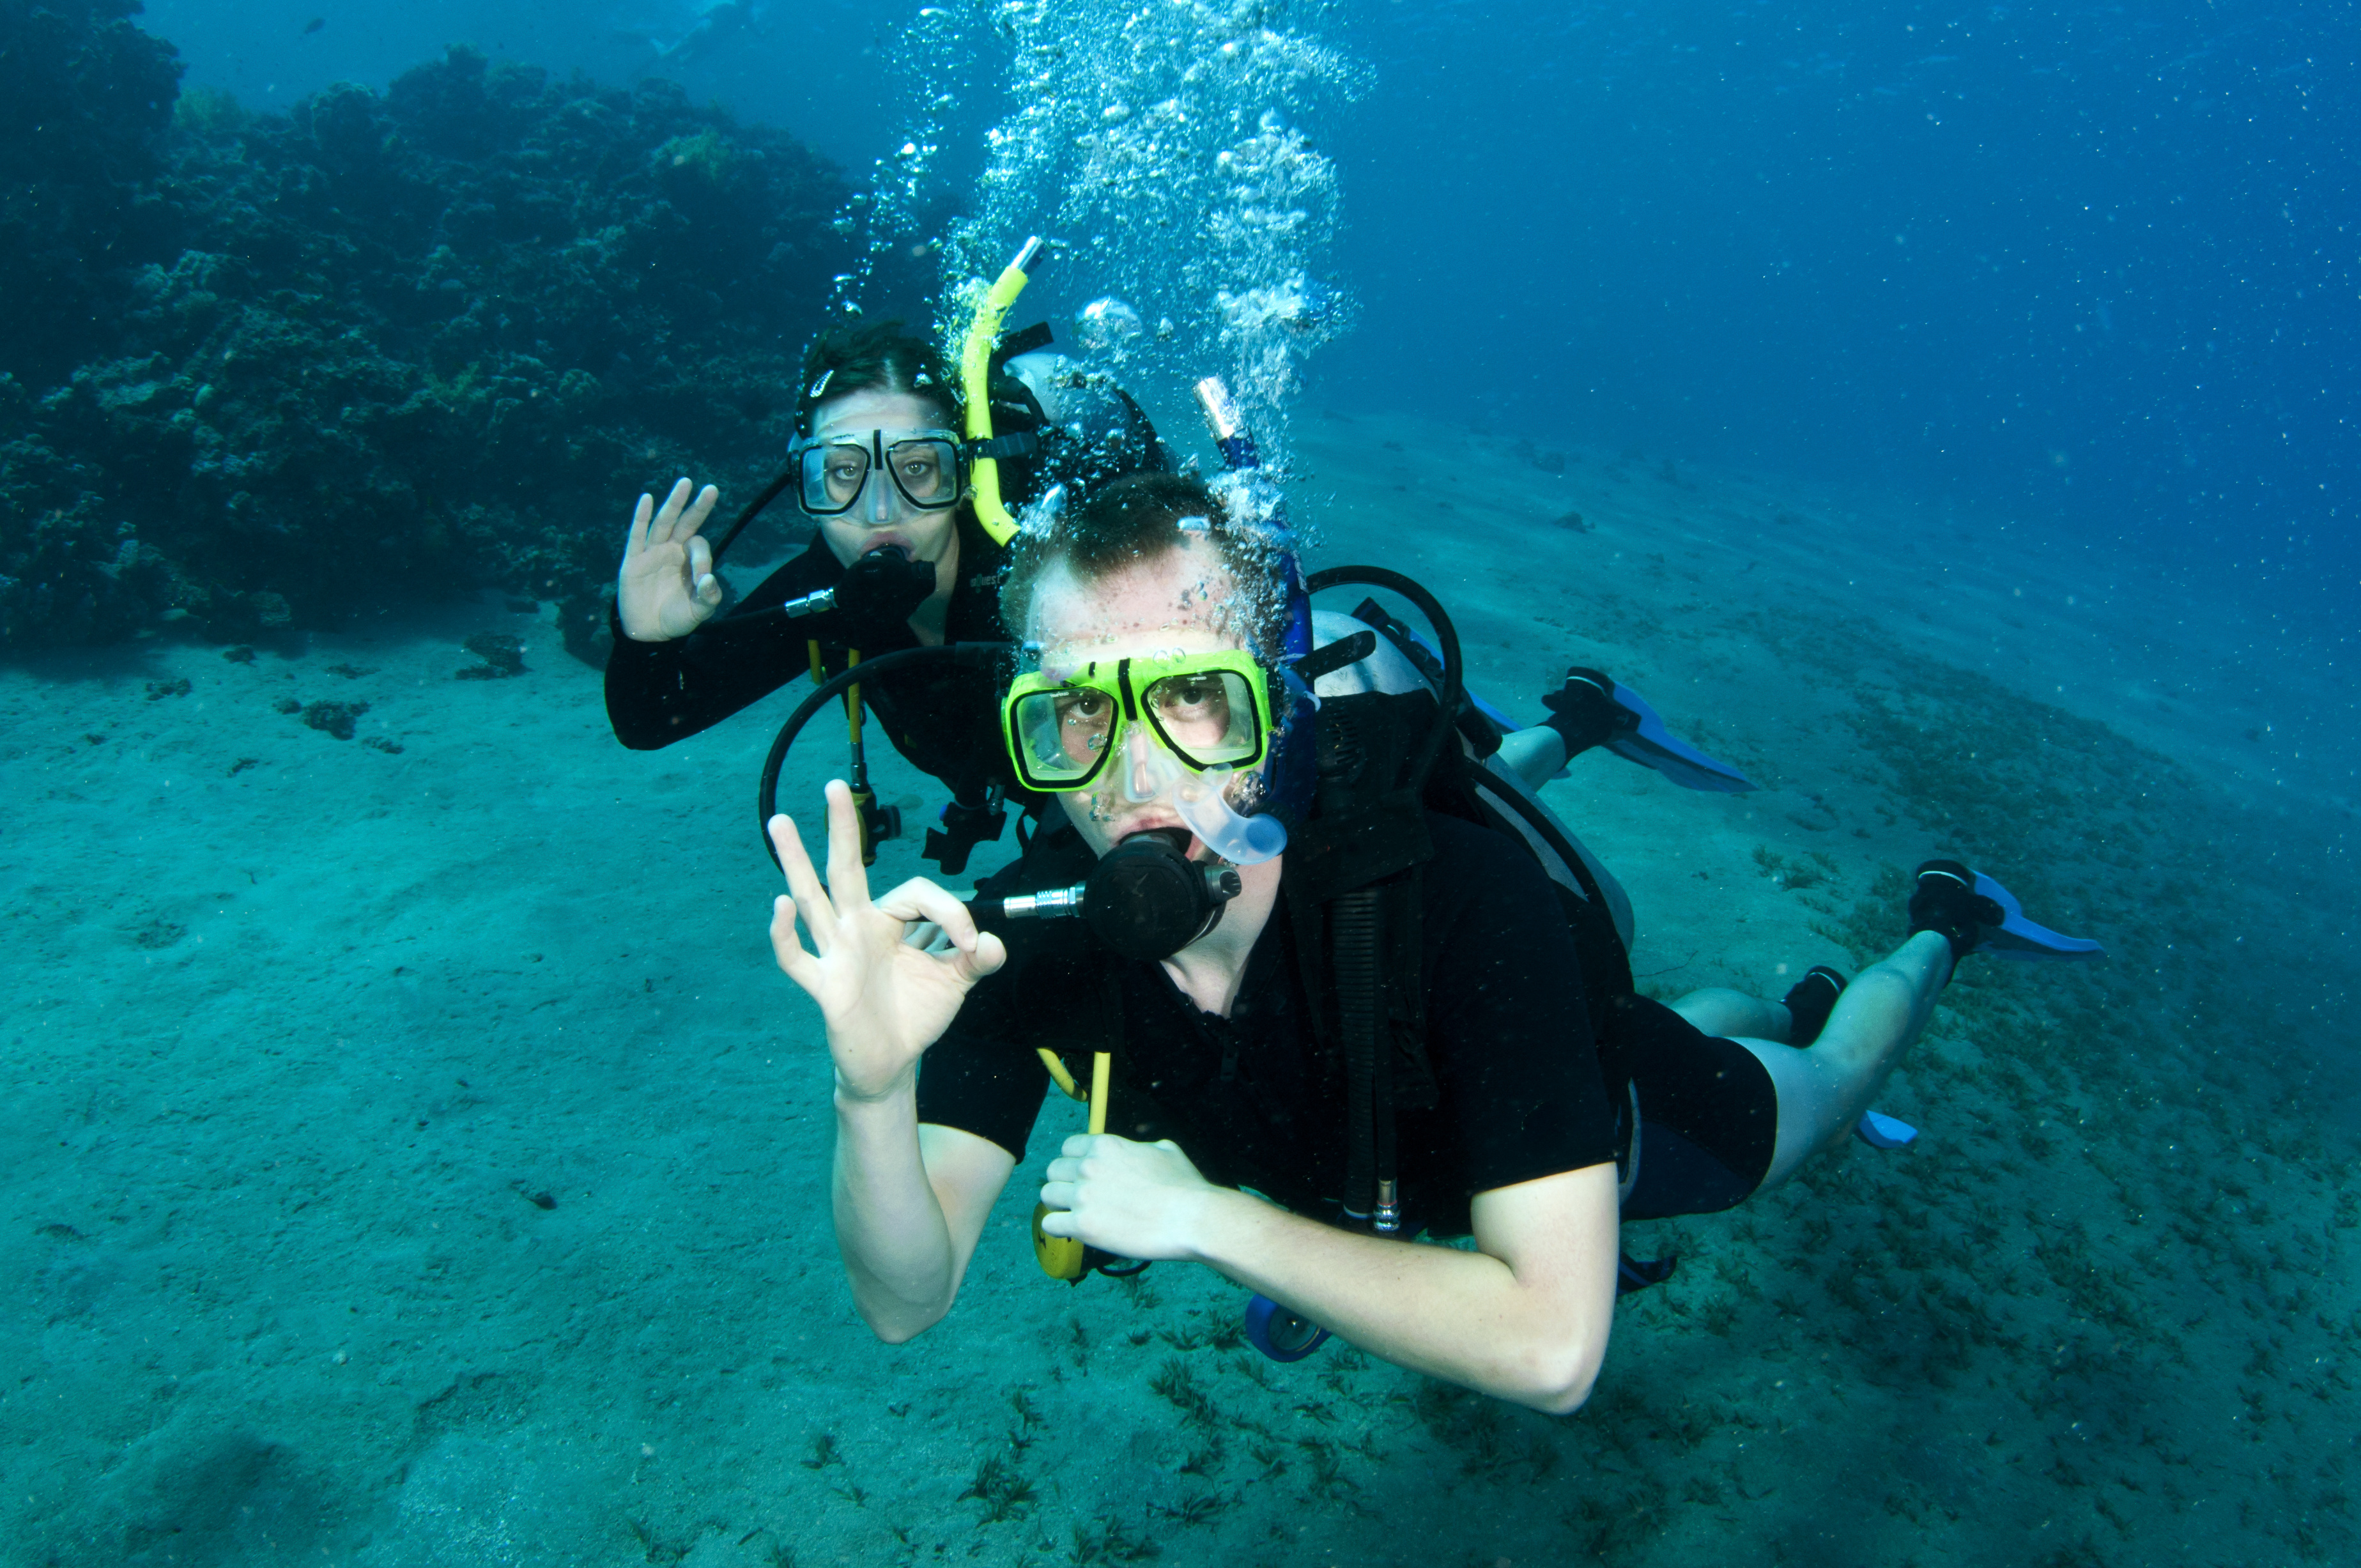 Two scuba divers avoid buddy separation by staying close to eachother and signal divemaster that they are ok